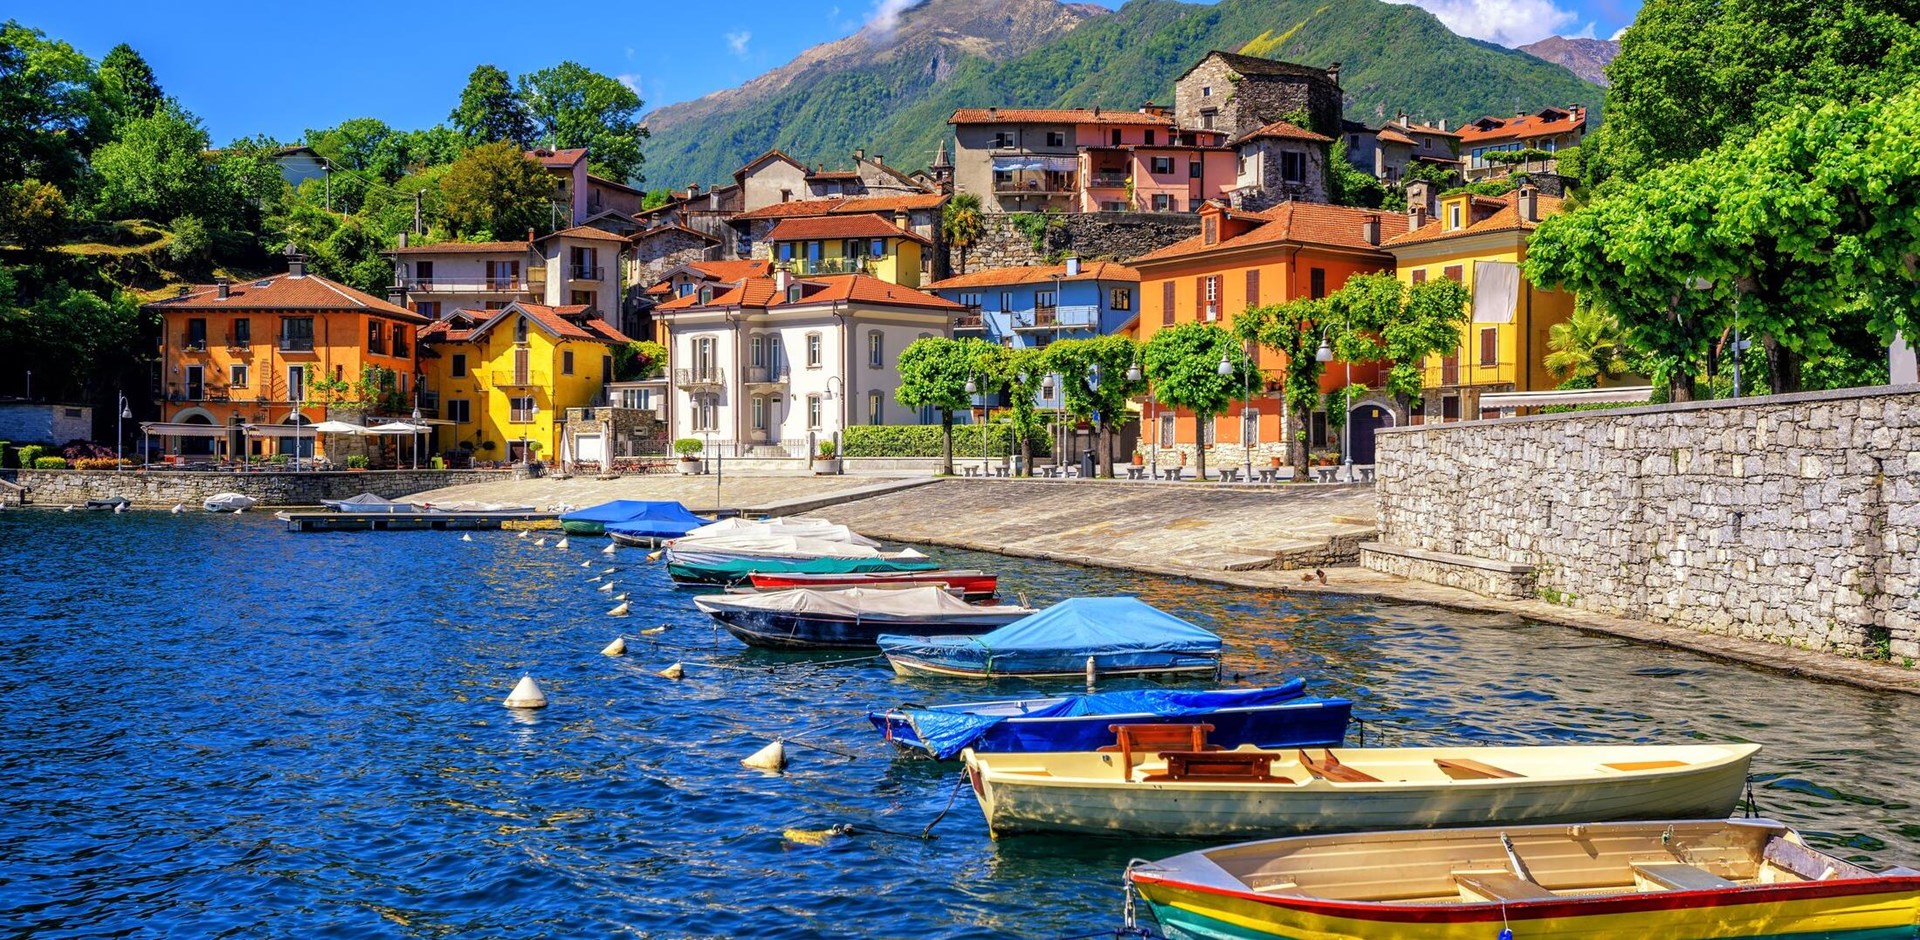 Colorful houses in the old town of Mergozzo, a popular holiday resort on Lago Maggiore lake, Italy